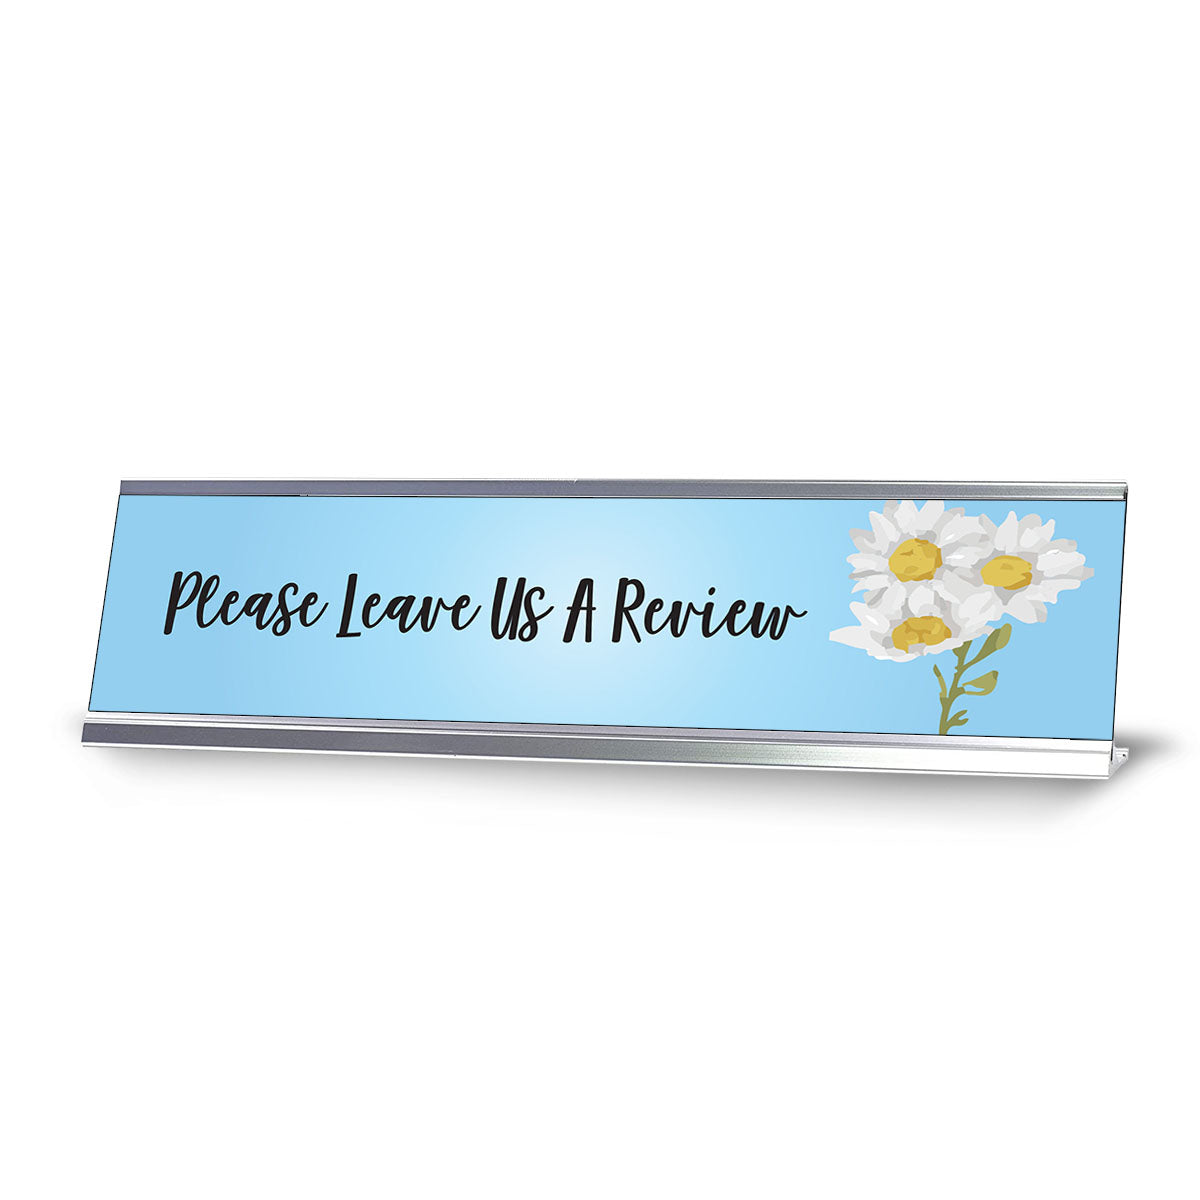 Please Leave Us A Review, Desk Sign or Front Desk Counter Sign (2 x 8")